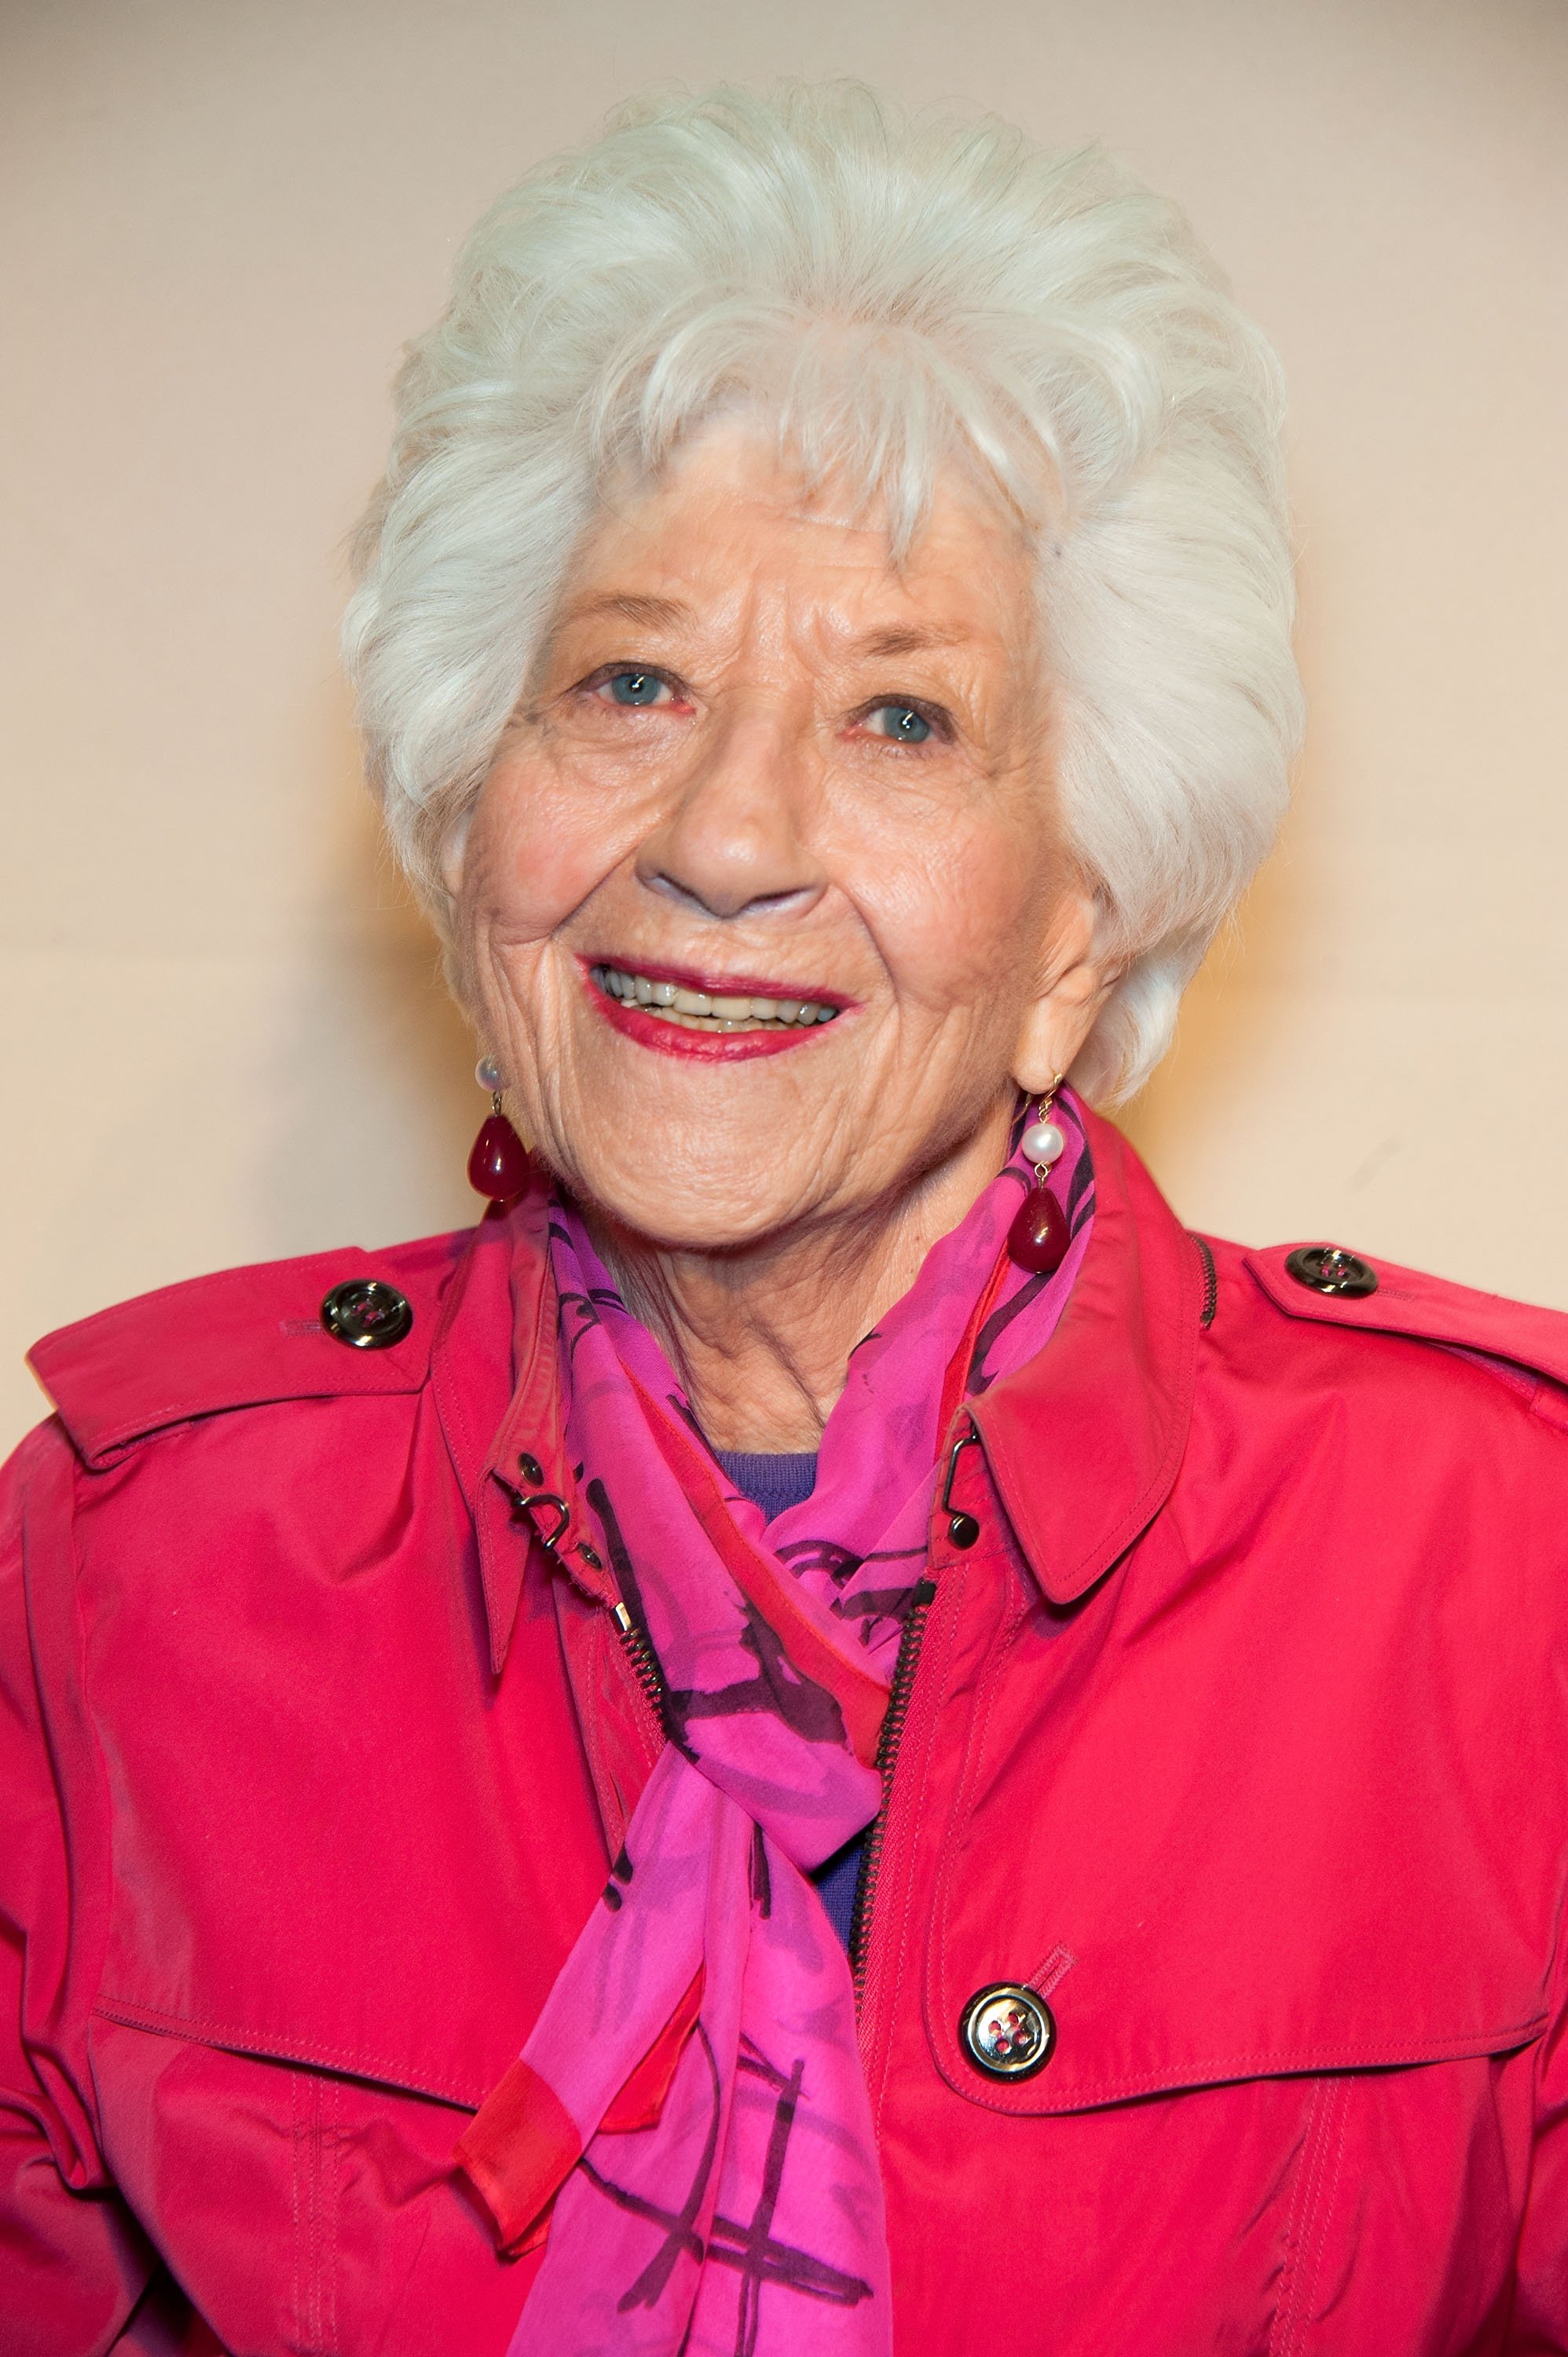 Charlotte Rae attends The Academy Of Television Arts & Sciences Presents "Retire From Showbiz? No Thanks!" at Academy of Television Arts & Sciences Conference Centre on January 31, 2013. | Source: Getty Images